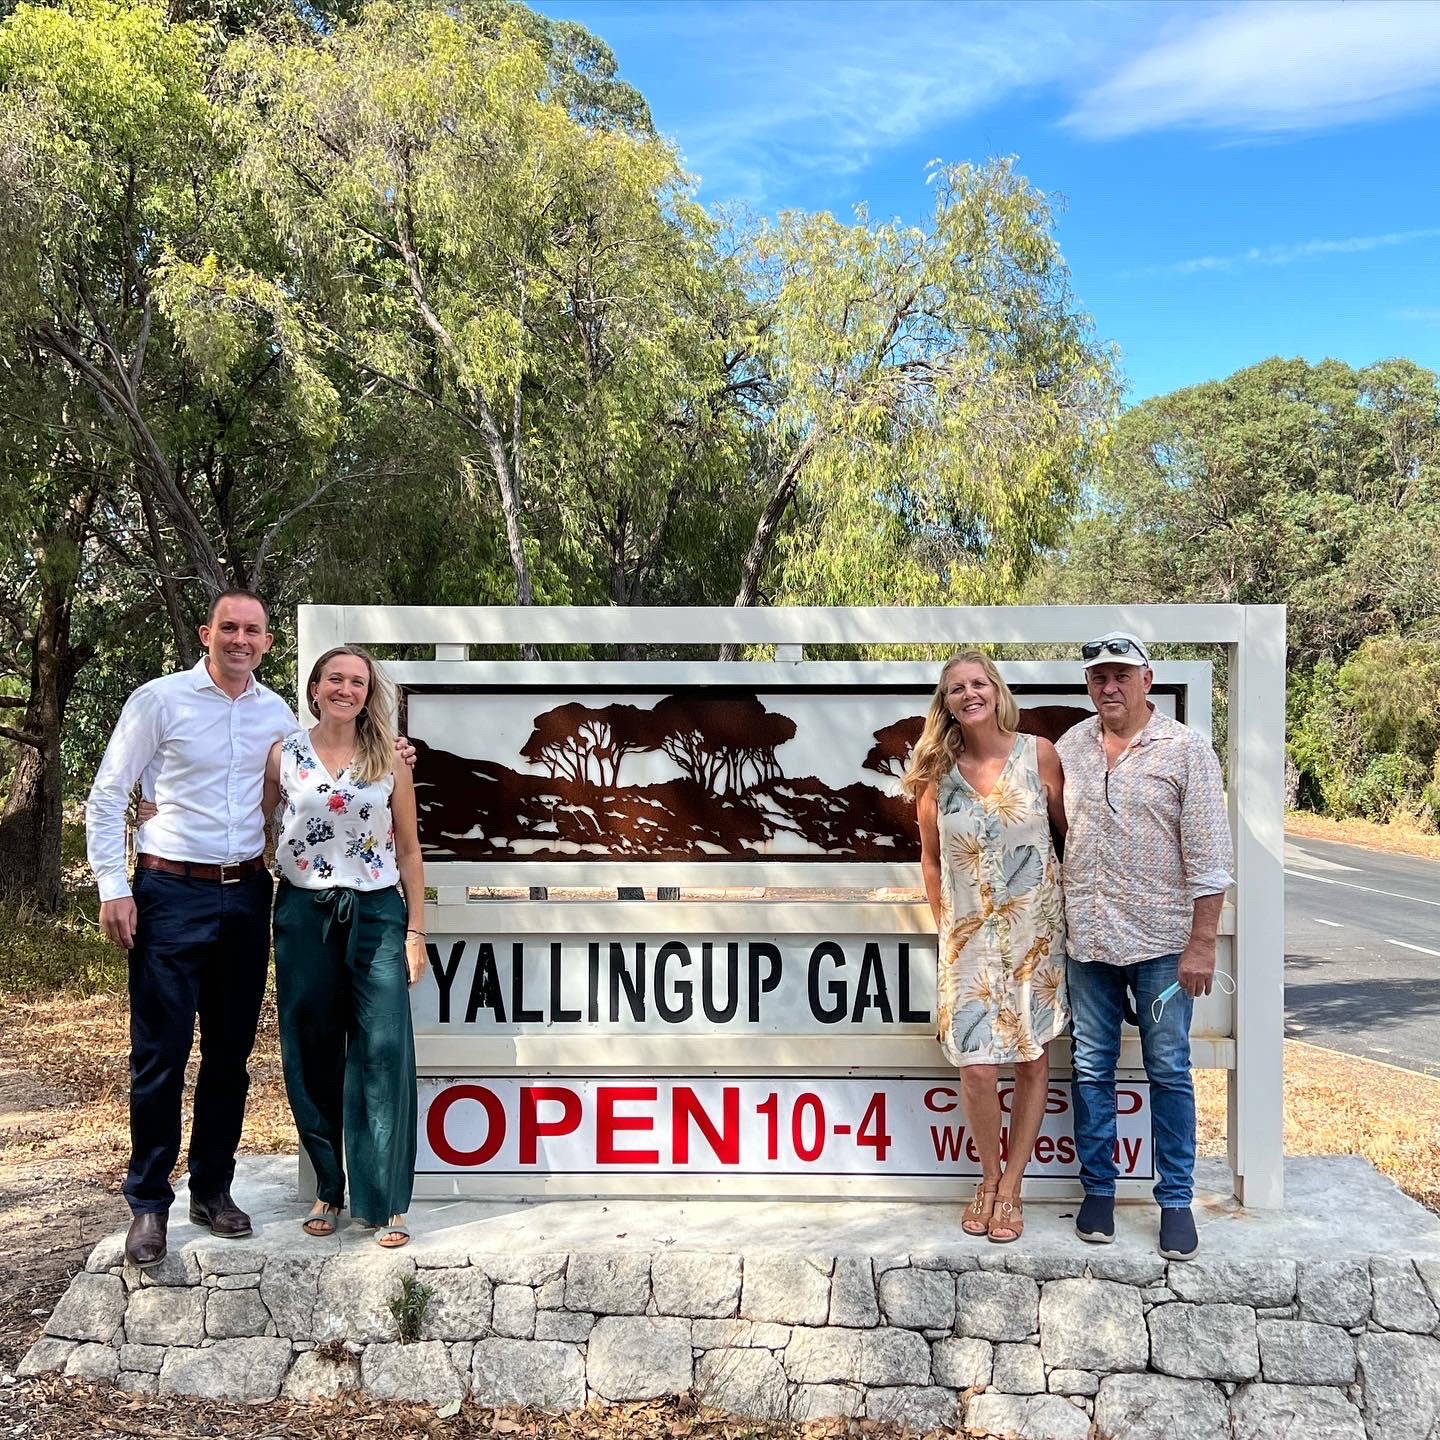 Yallingup Galleries owners Matthew and Emma Skinner out the front of the South West WA Art Gallery